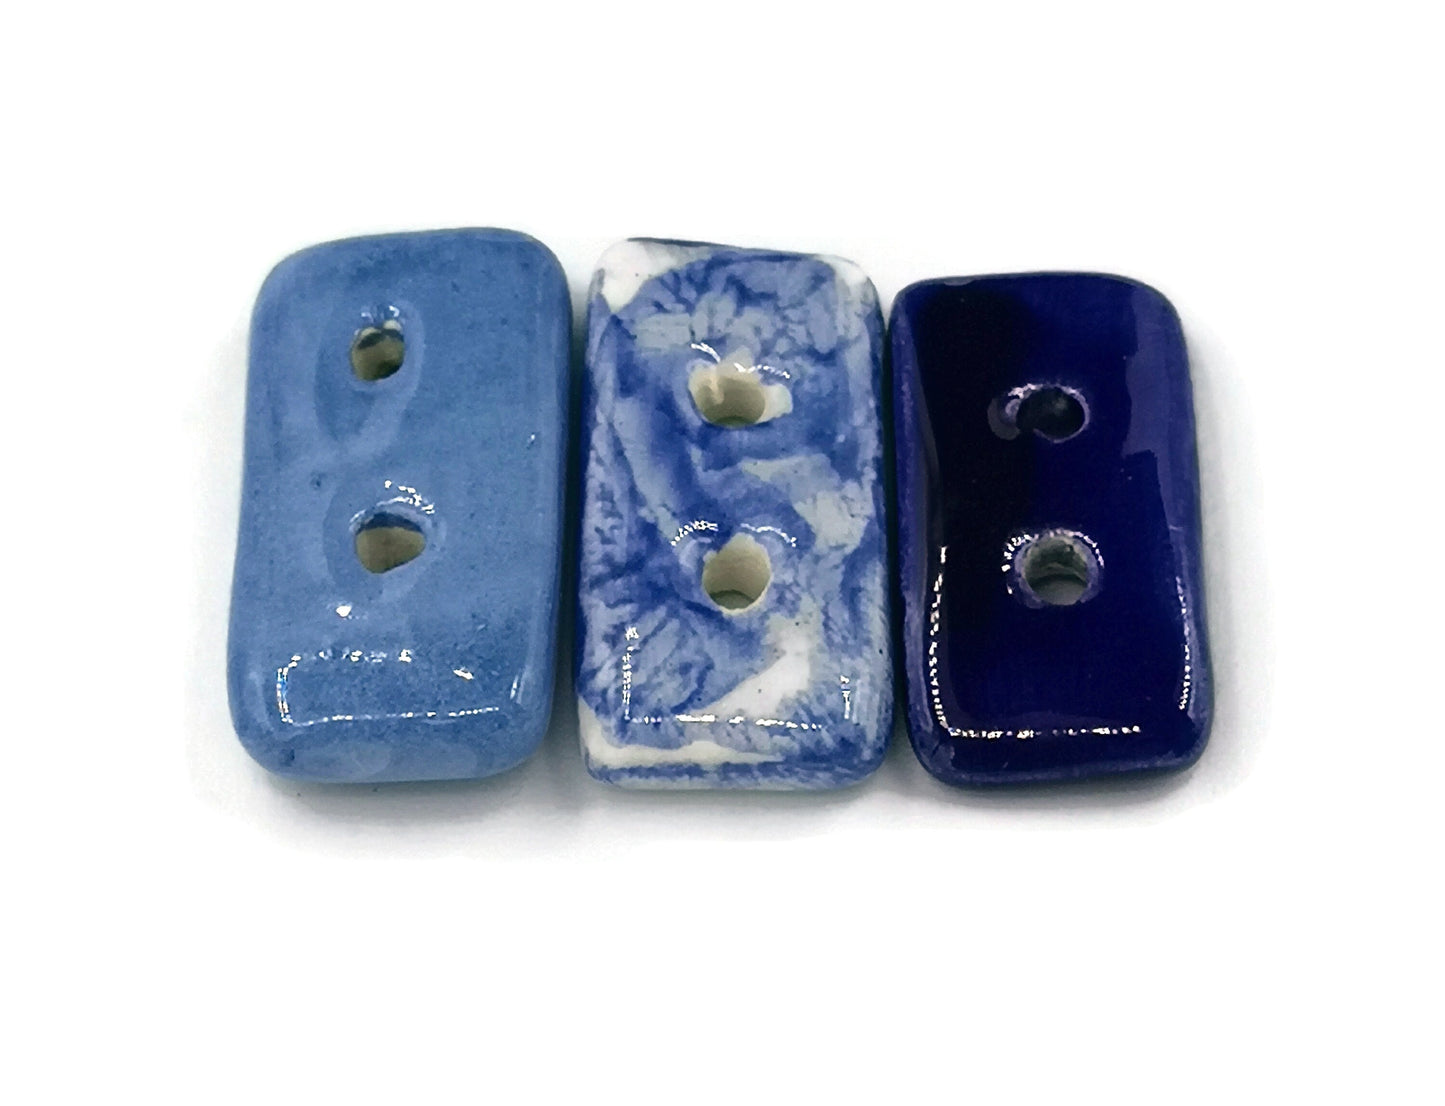 3Pc 25mm Large Rectangle Blue Sewing Buttons For Crafts, Handmade Ceramic Best Sellers Sewing Supplies And Notions, Custom Clay Buttons Cute - Ceramica Ana Rafael